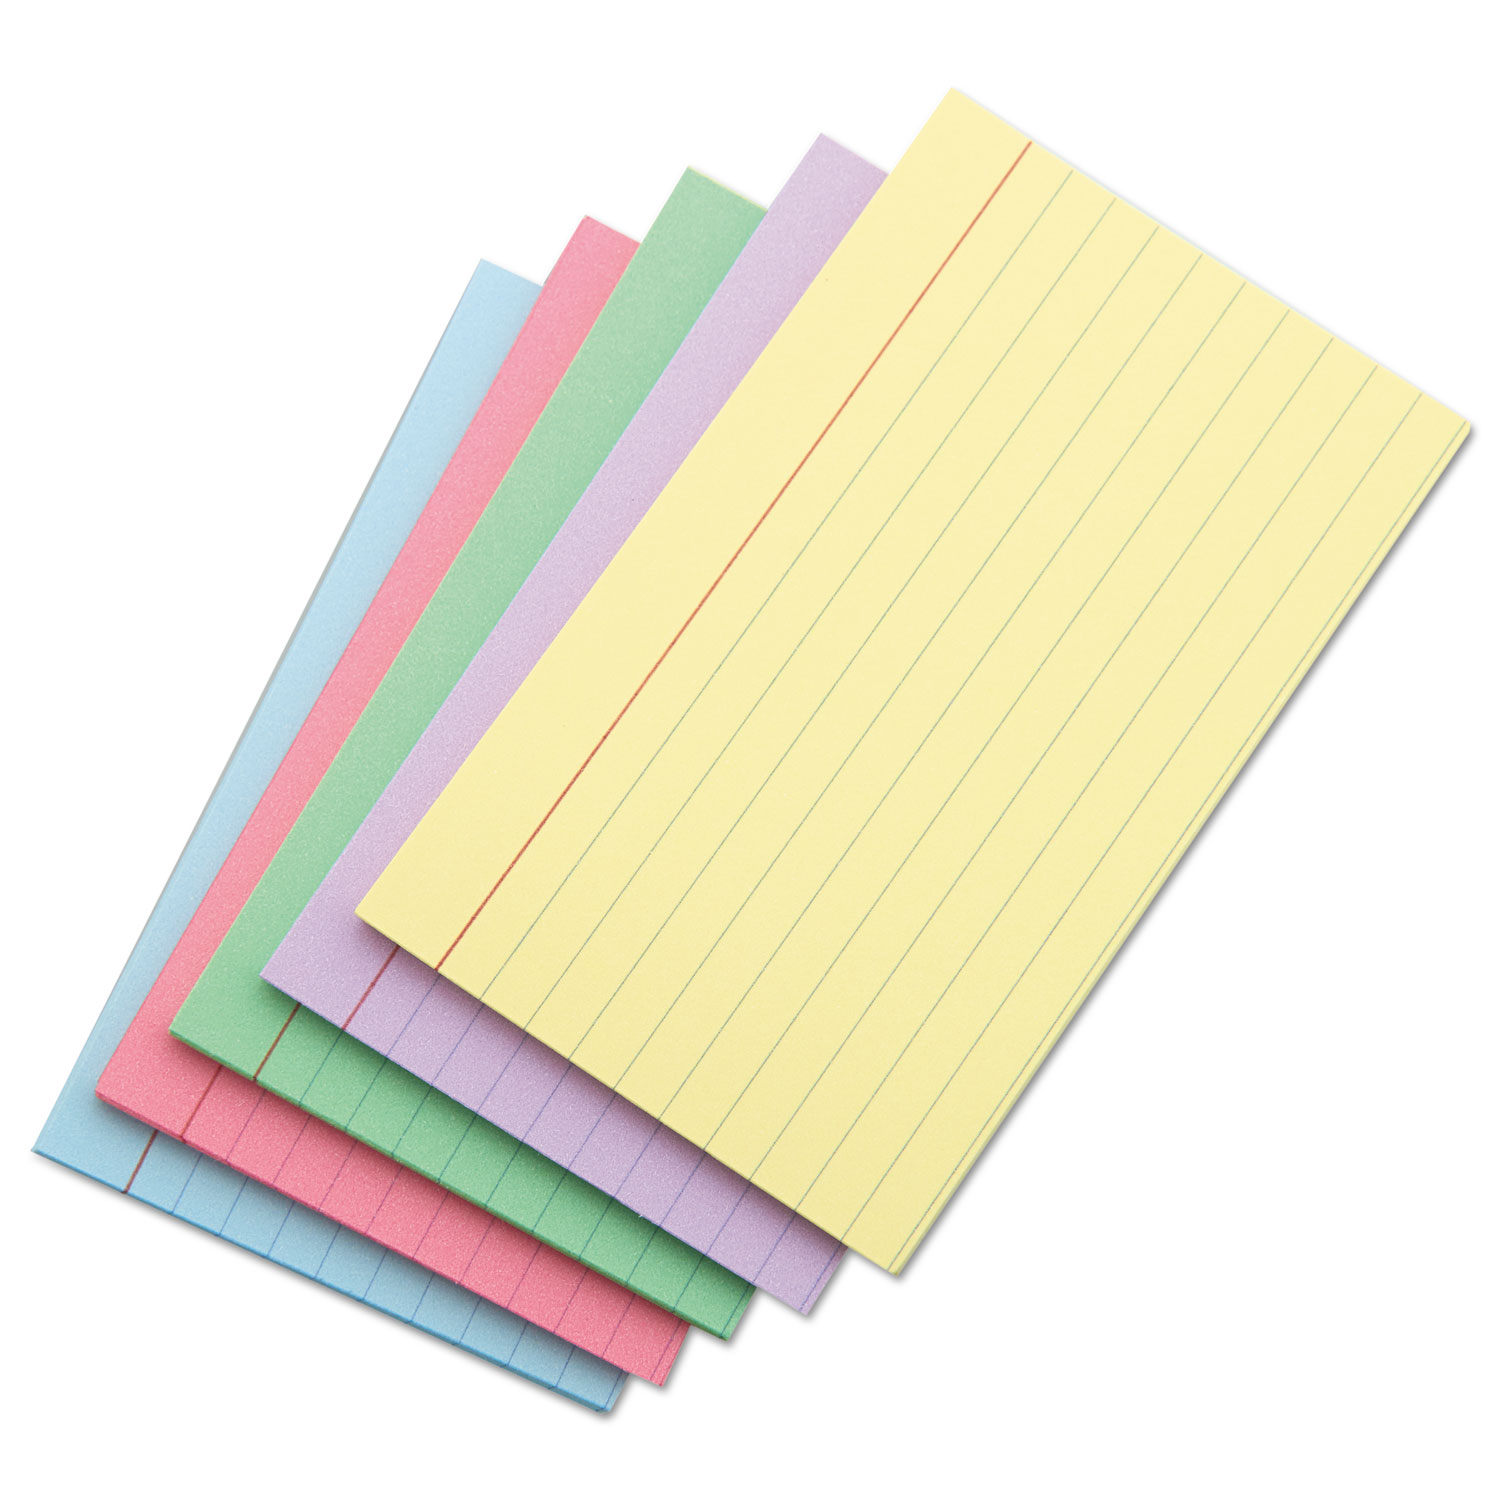 INDEX CARDS 4X6 RULED  Normandale CC Bookstore